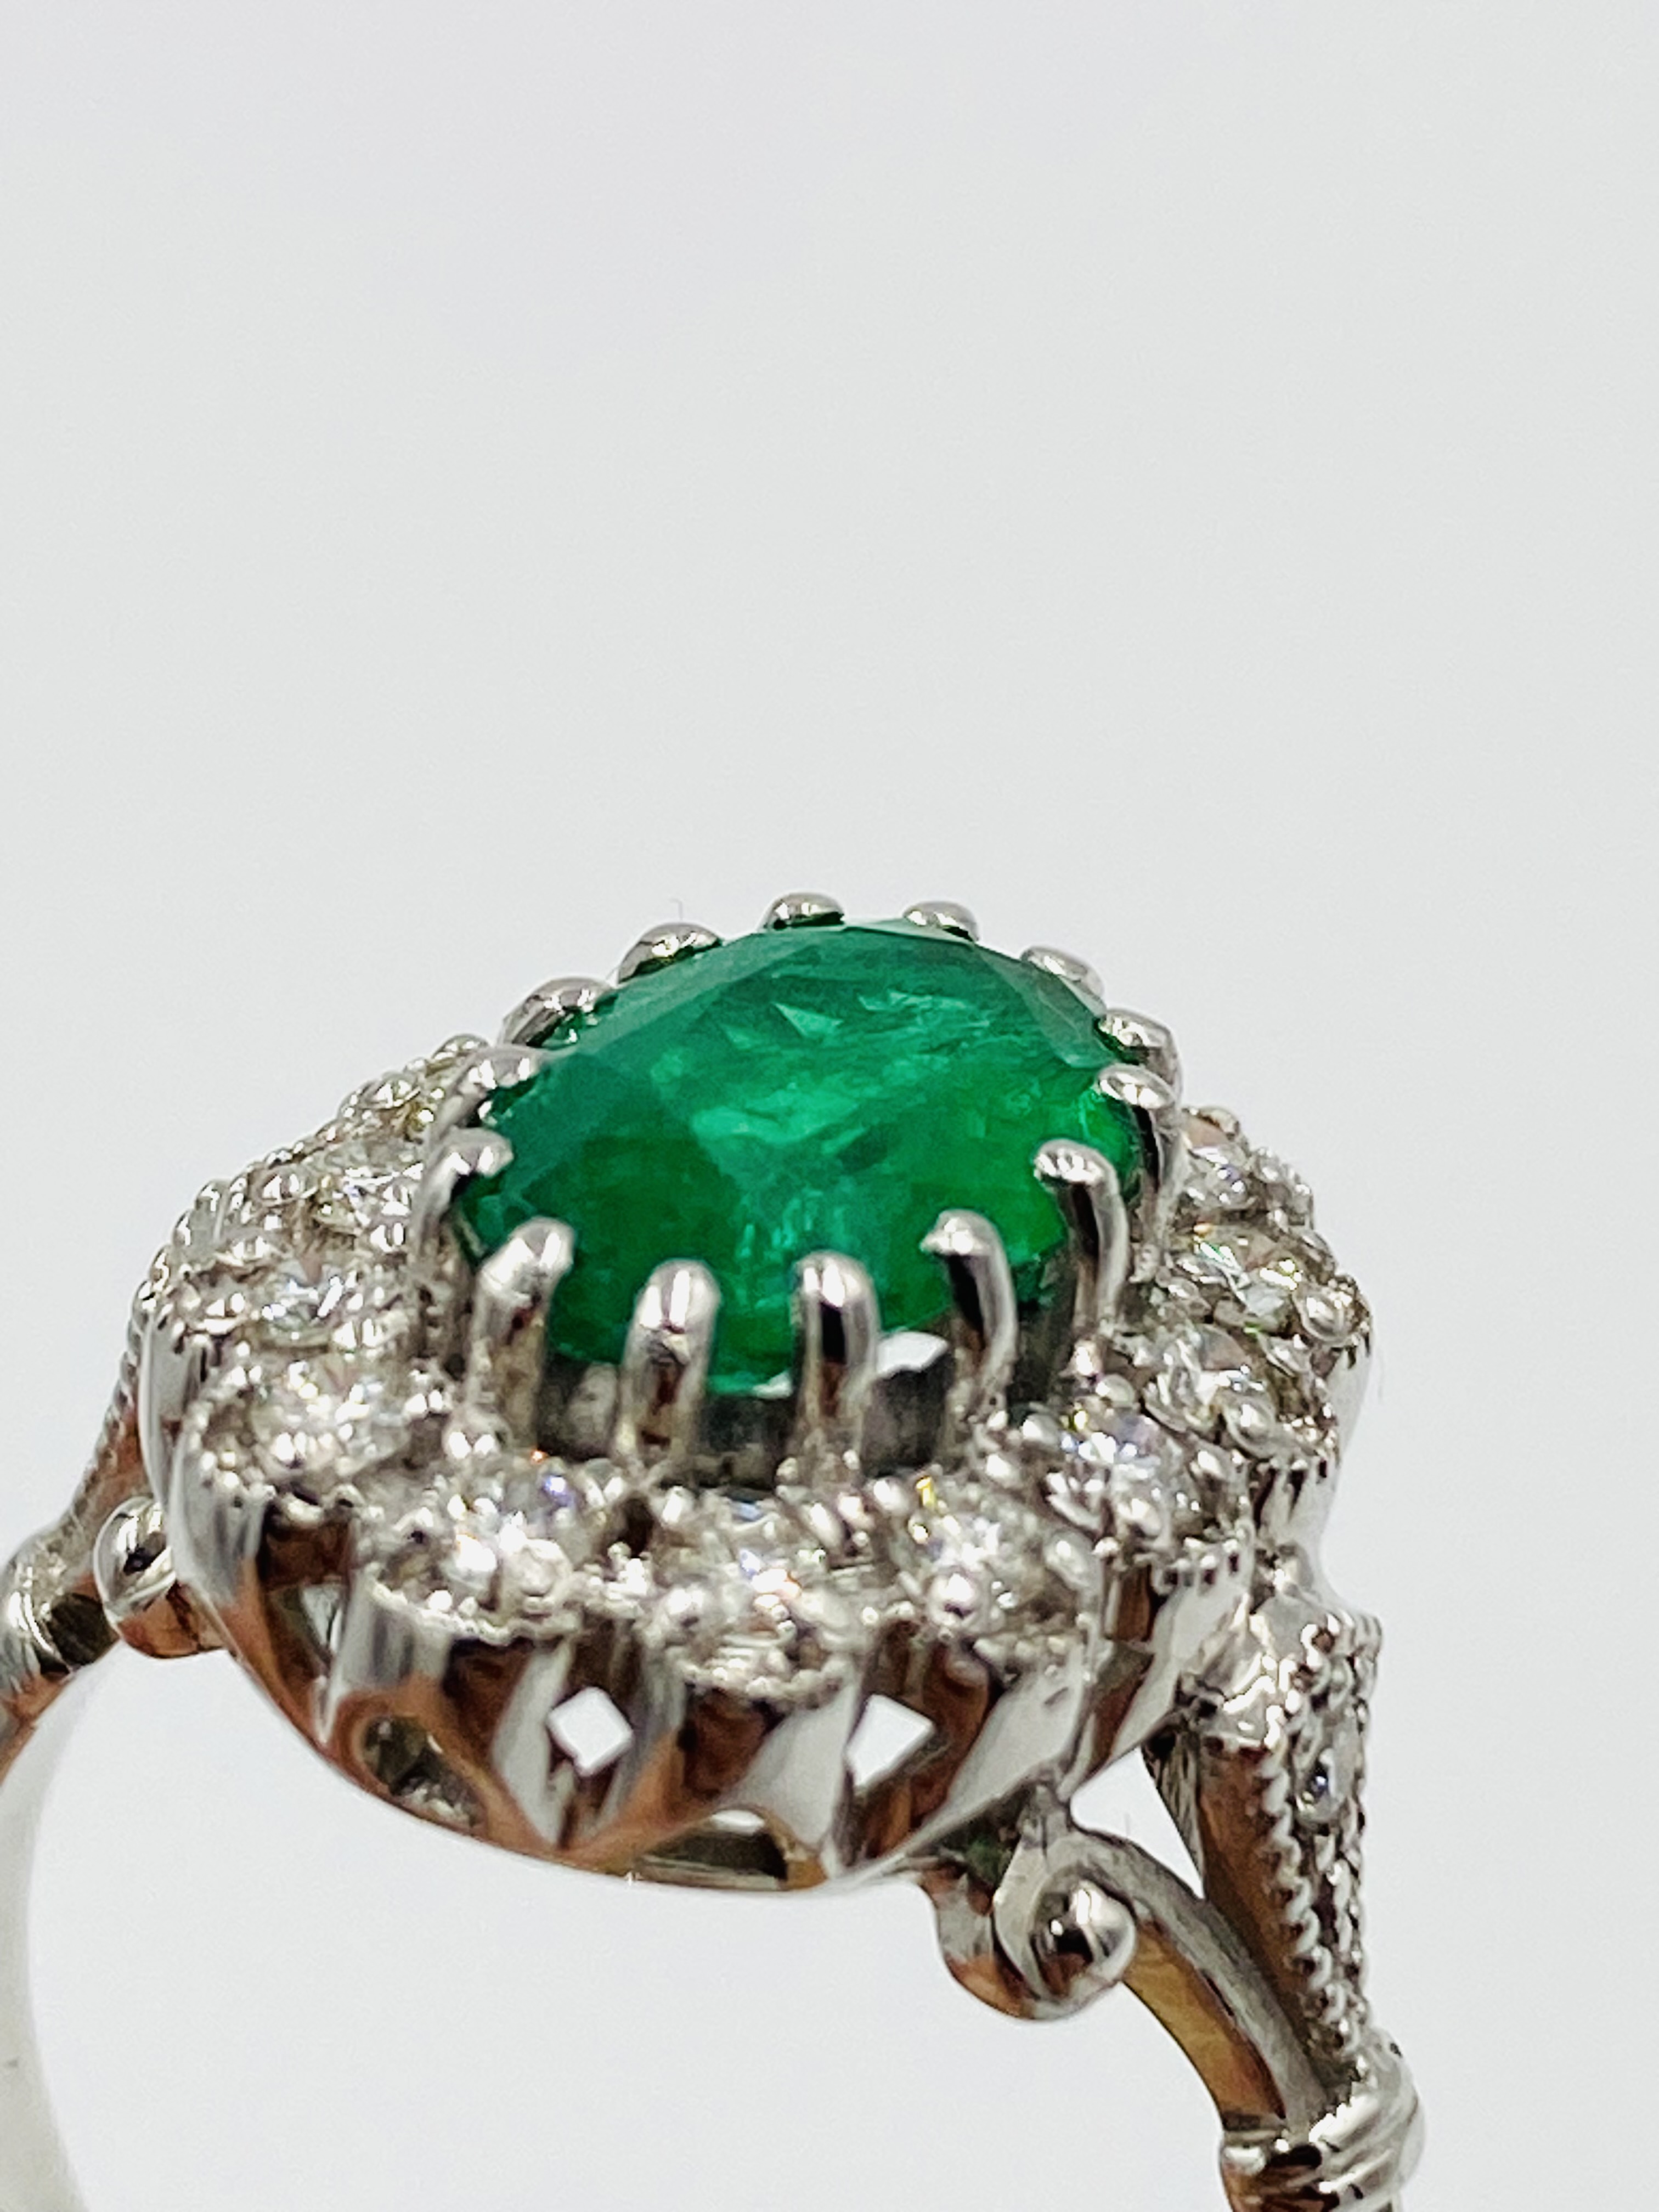 White gold, emerald and diamond ring - Image 4 of 5